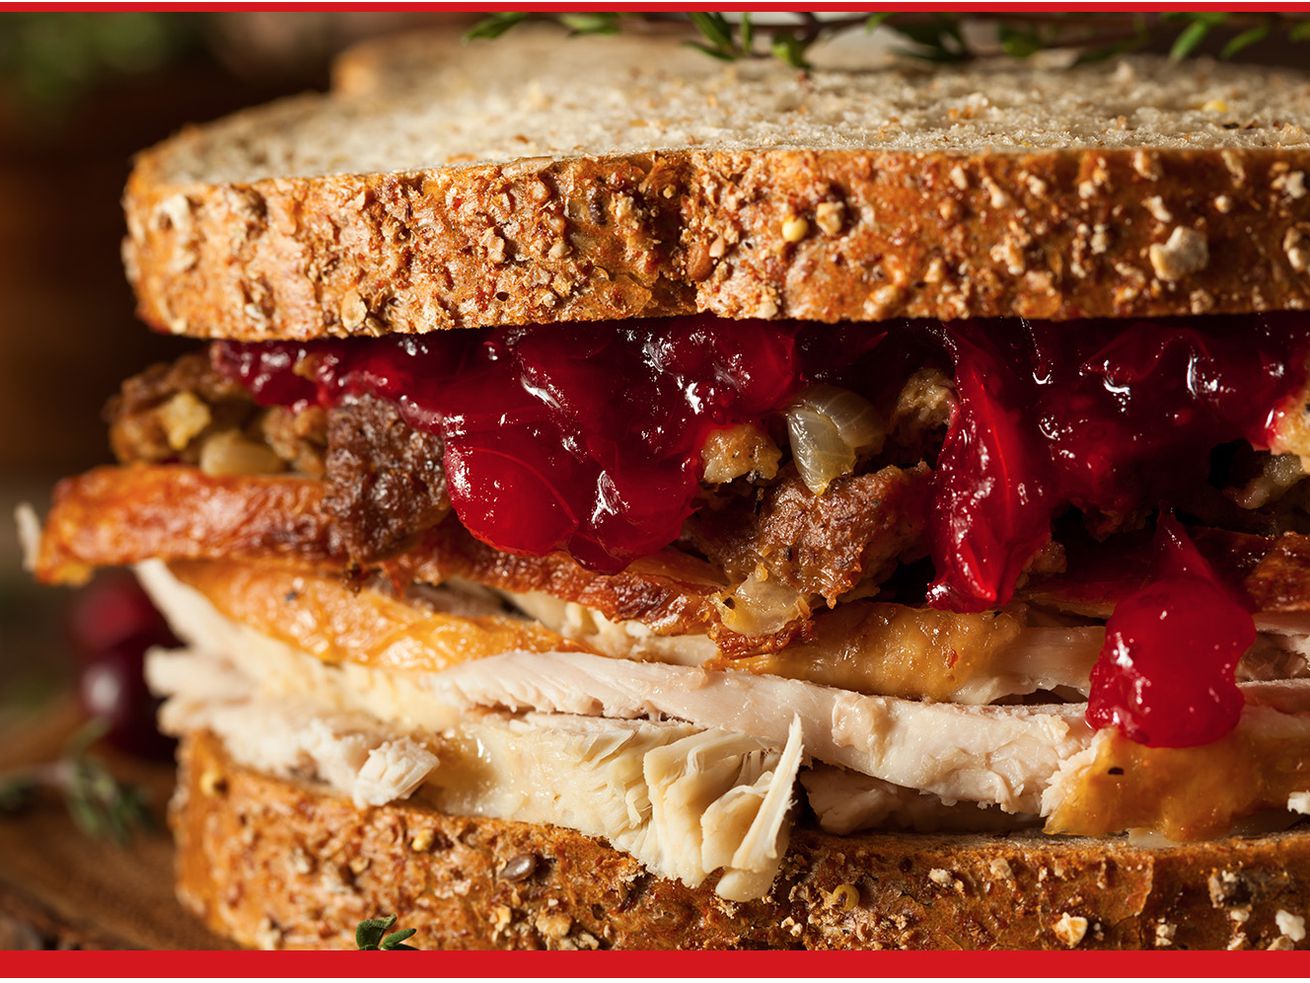 Sandwich with turkey, cranberry sauce, and stuffing in between two slices of bread.